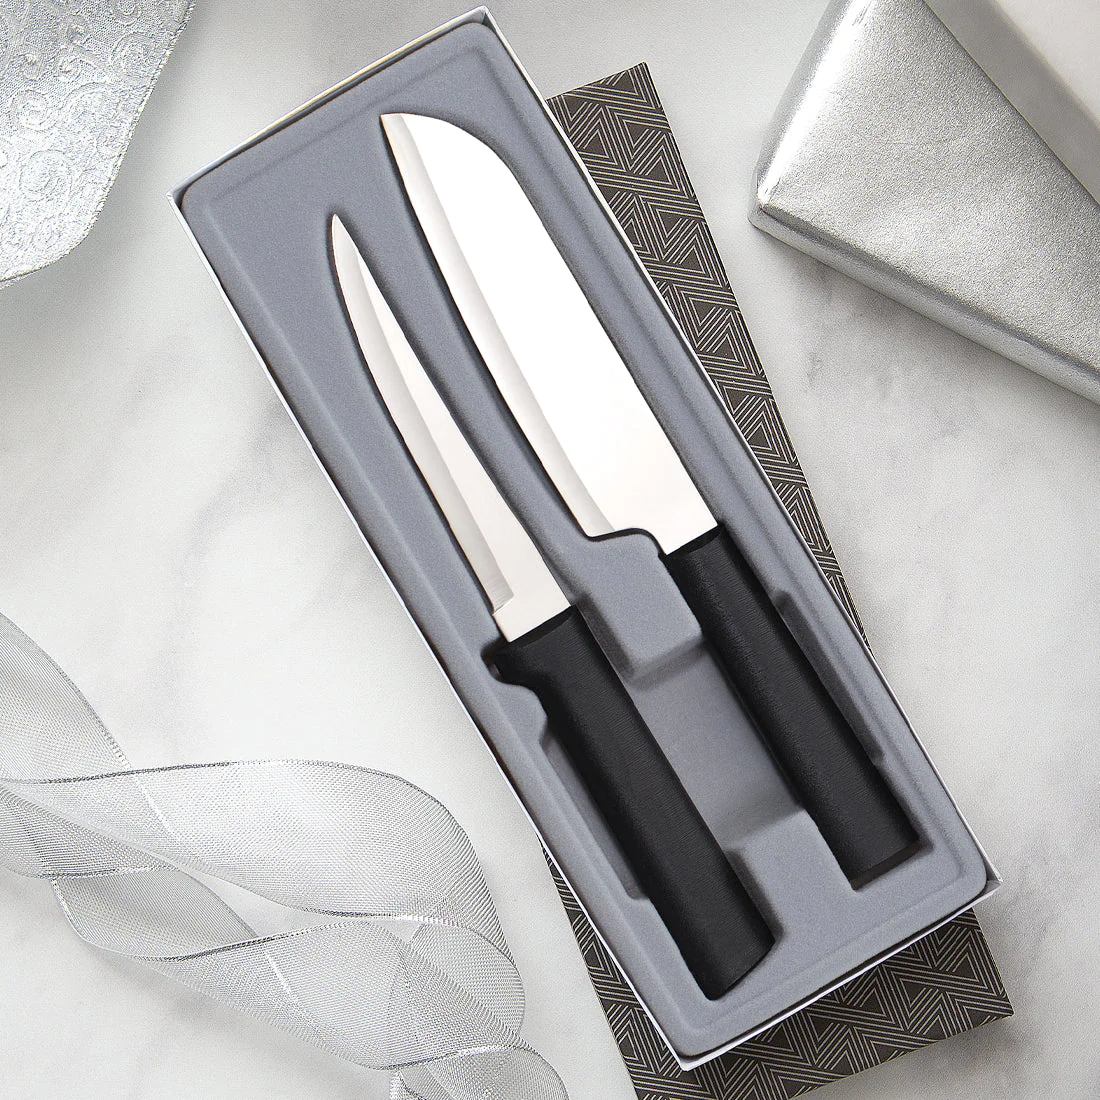 Rada Cutlery 2-Piece Paring Knife Set and Knife Sharpener Stainless